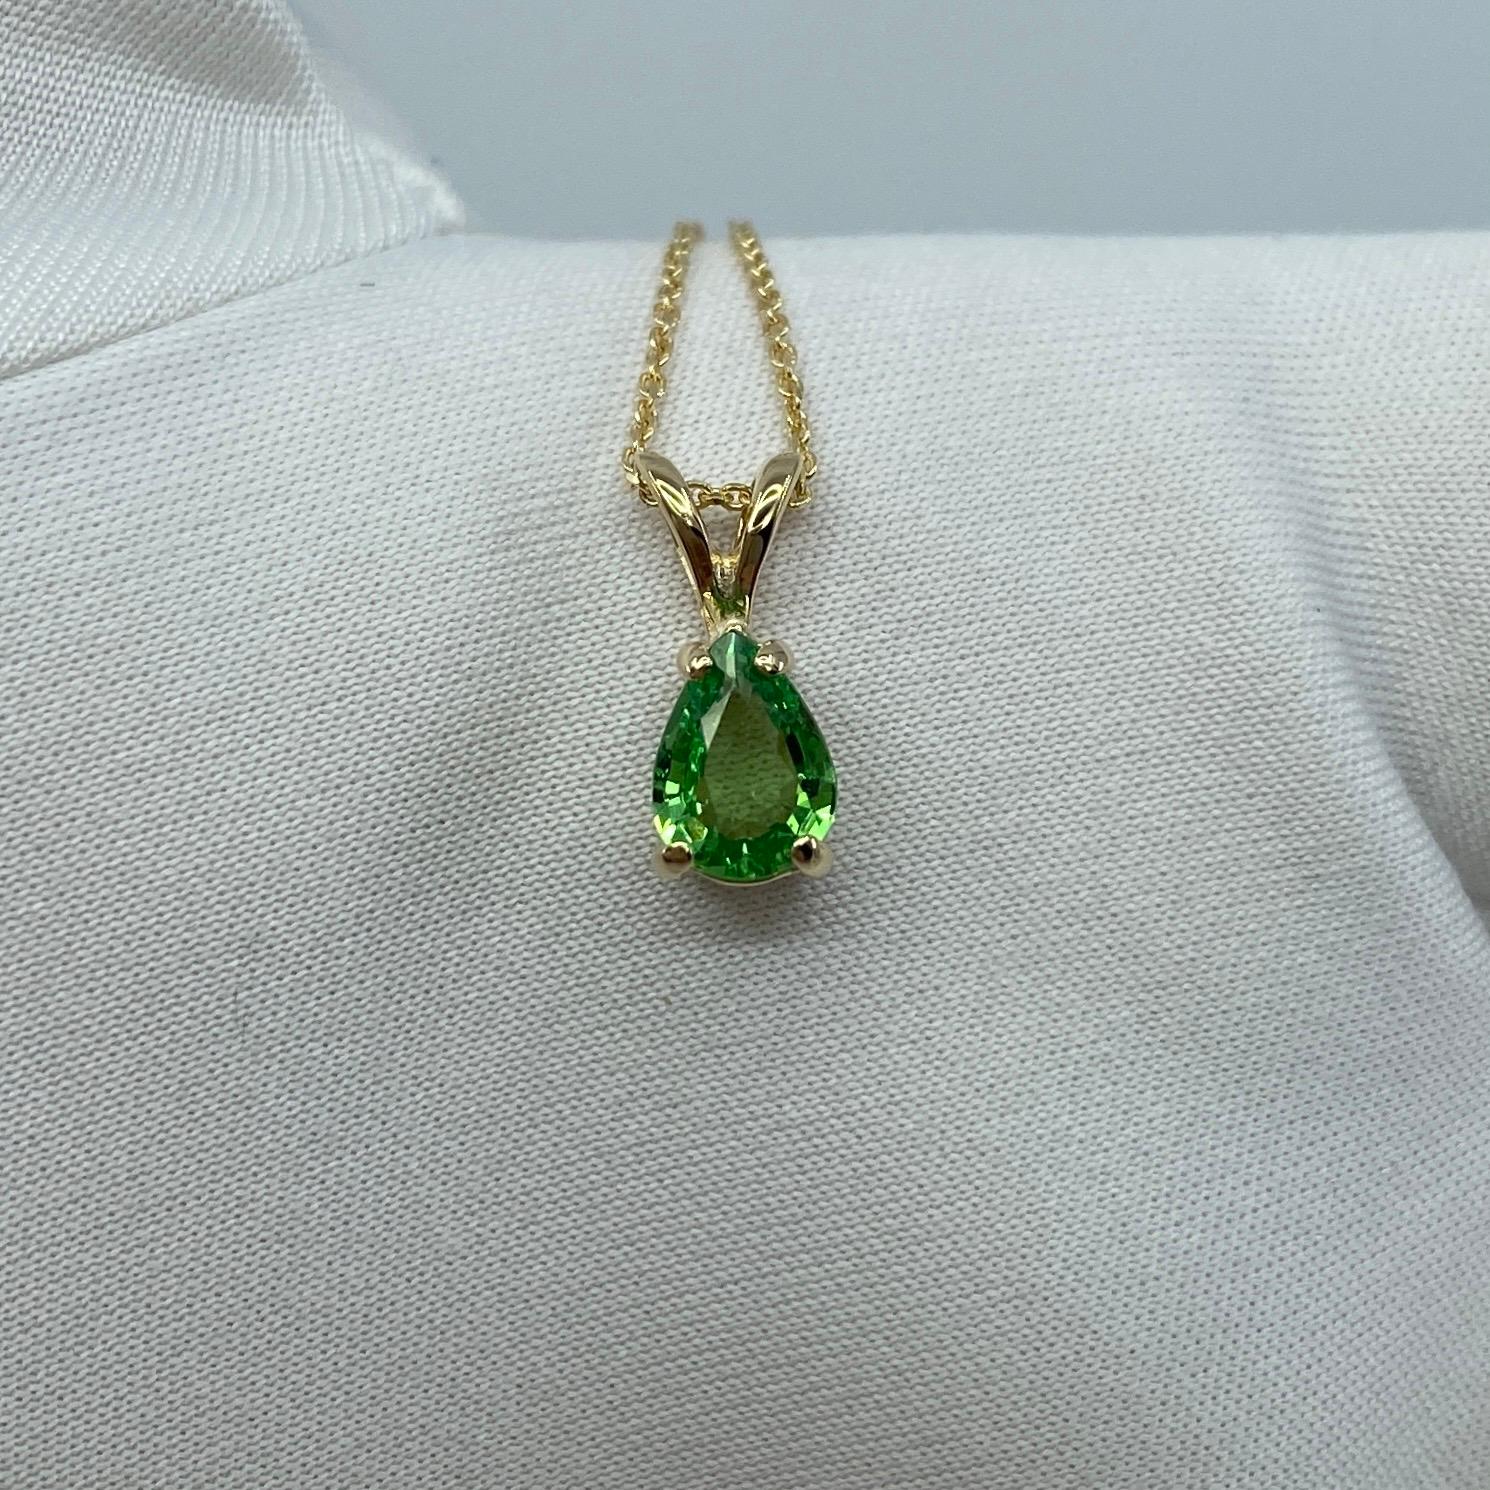 Vivid Green Tsavorite Garnet Yellow Gold Solitaire Pendant.

A beautiful Tsavorite garnet with a vivid green colour and excellent clarity set in a fine 14k yellow gold solitaire pendant.

The pendant is hanging on an 18